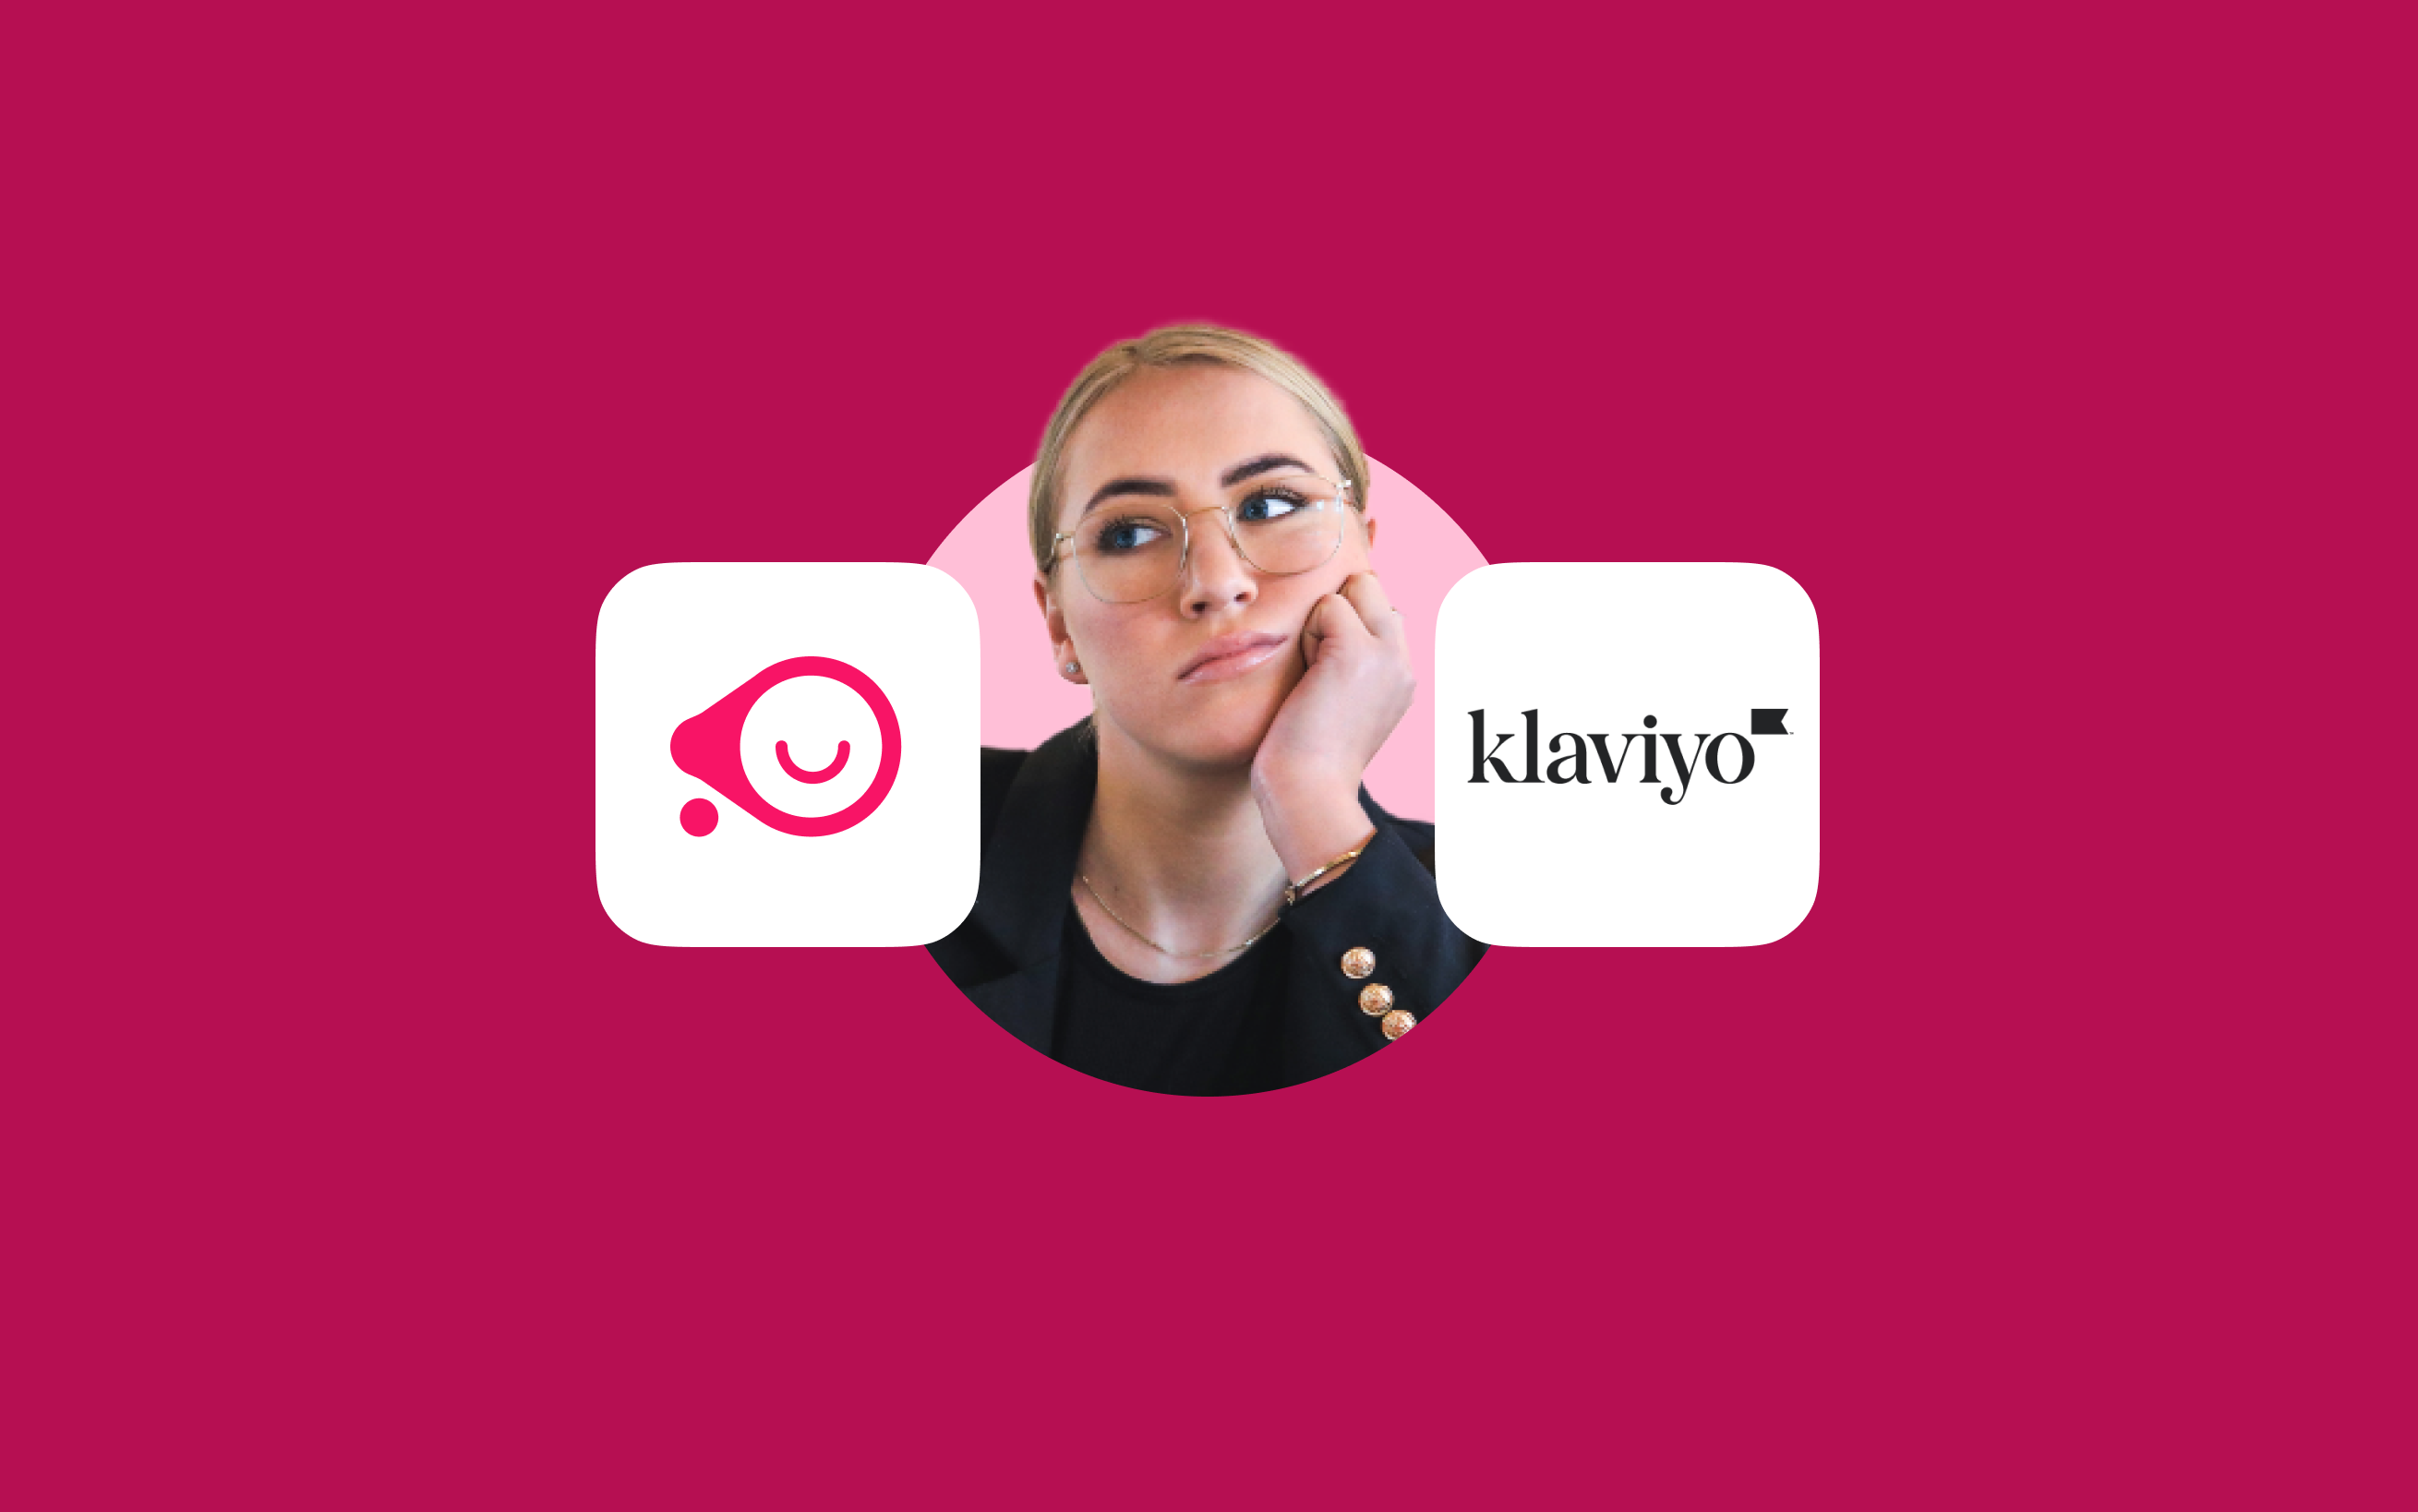 Automizely vs. Klaviyo: which marketing solution is right for you?